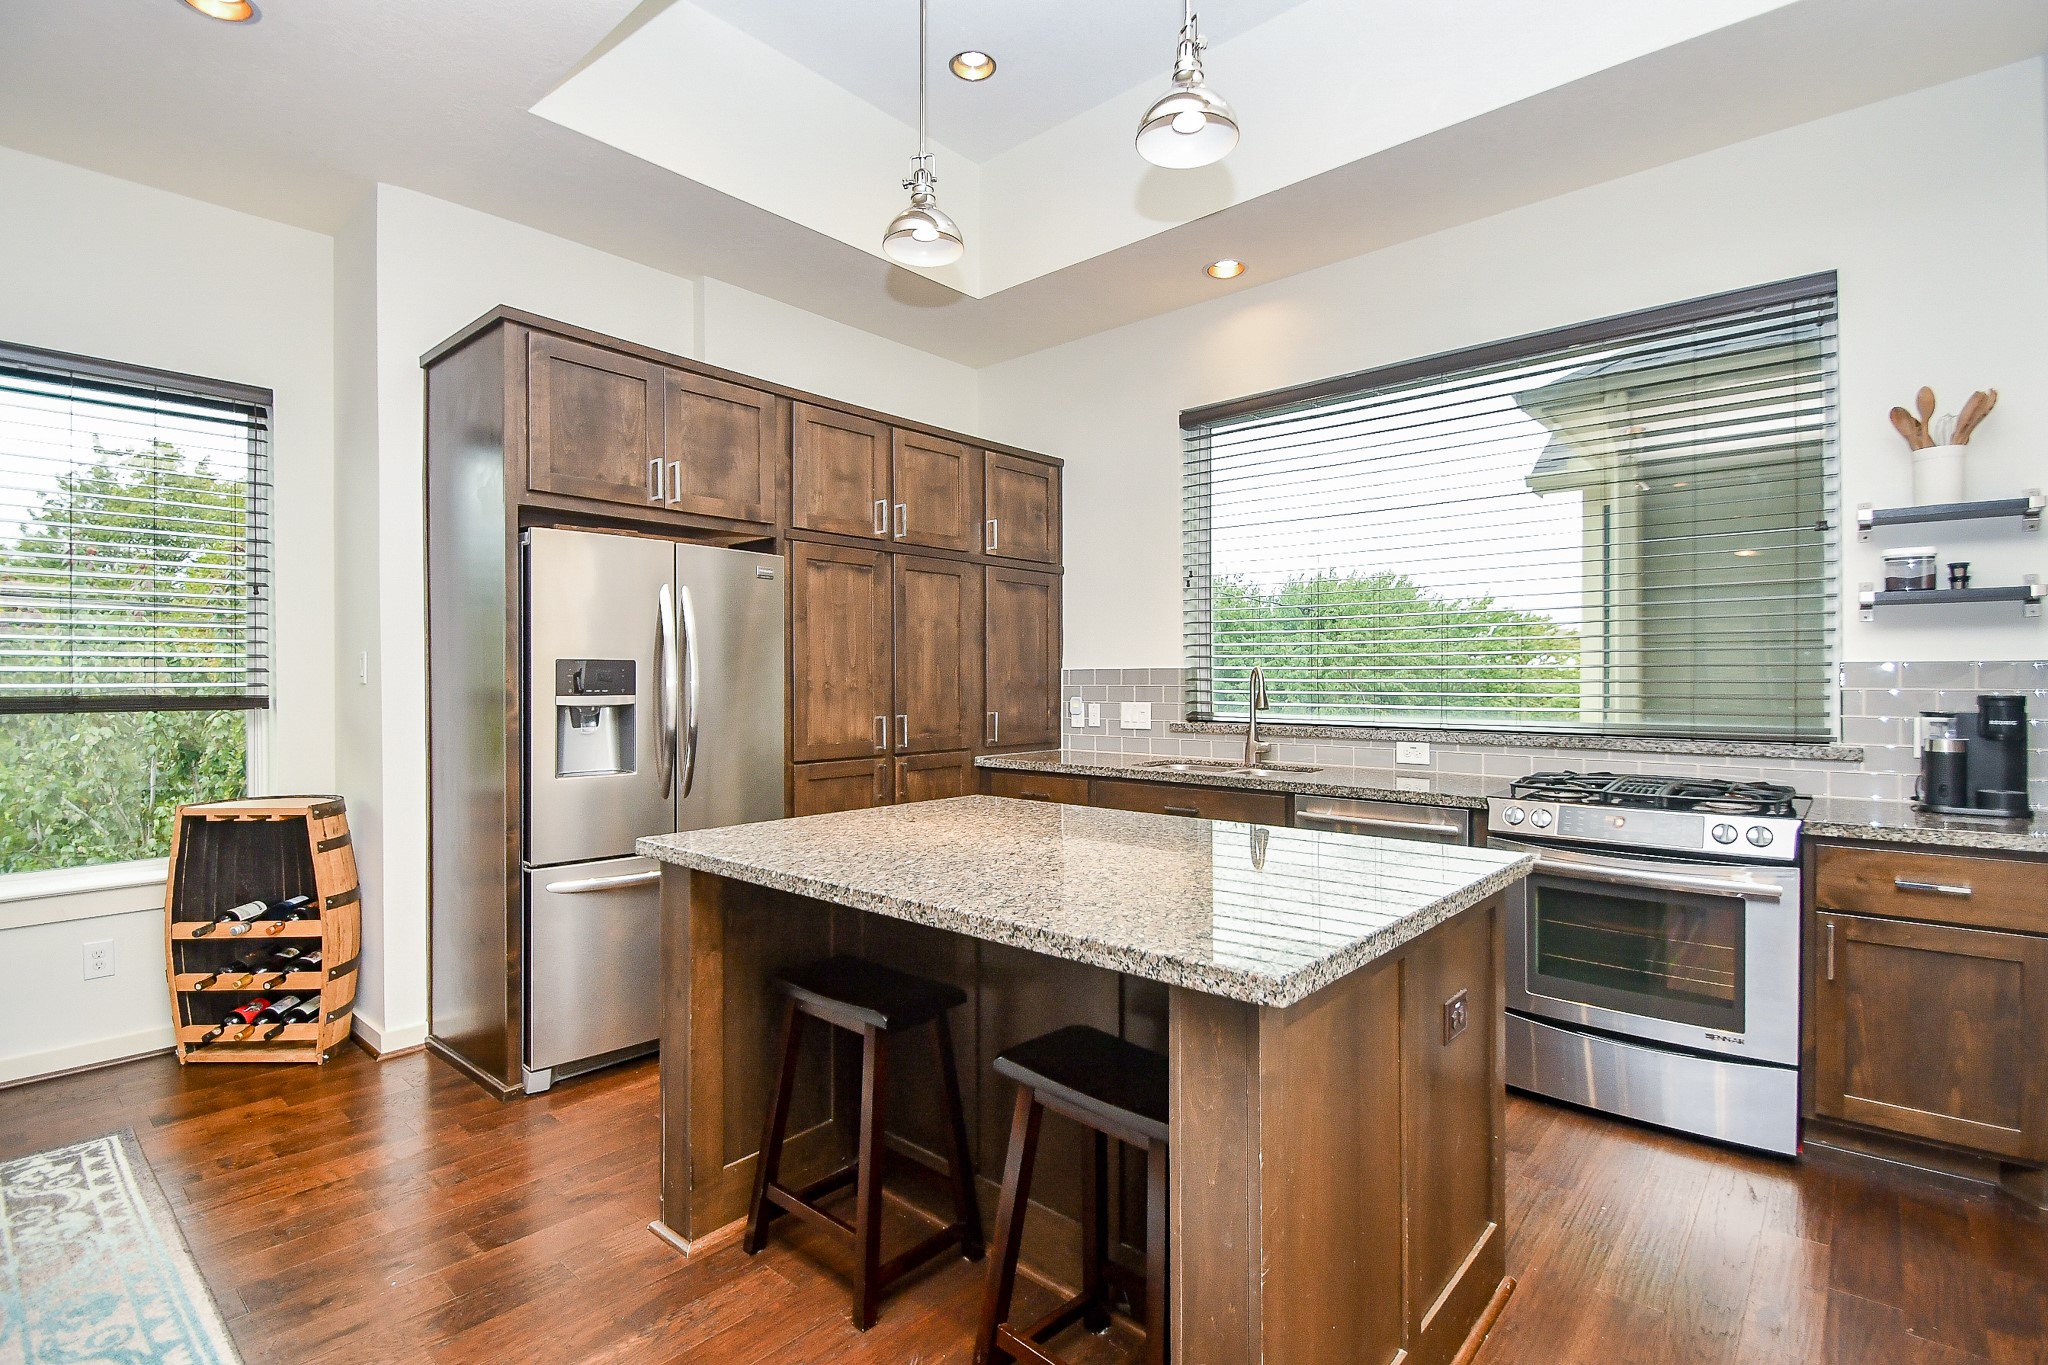 The kitchen features a huge island, tons of cabinetry storage and sleek stainless steel appliances.